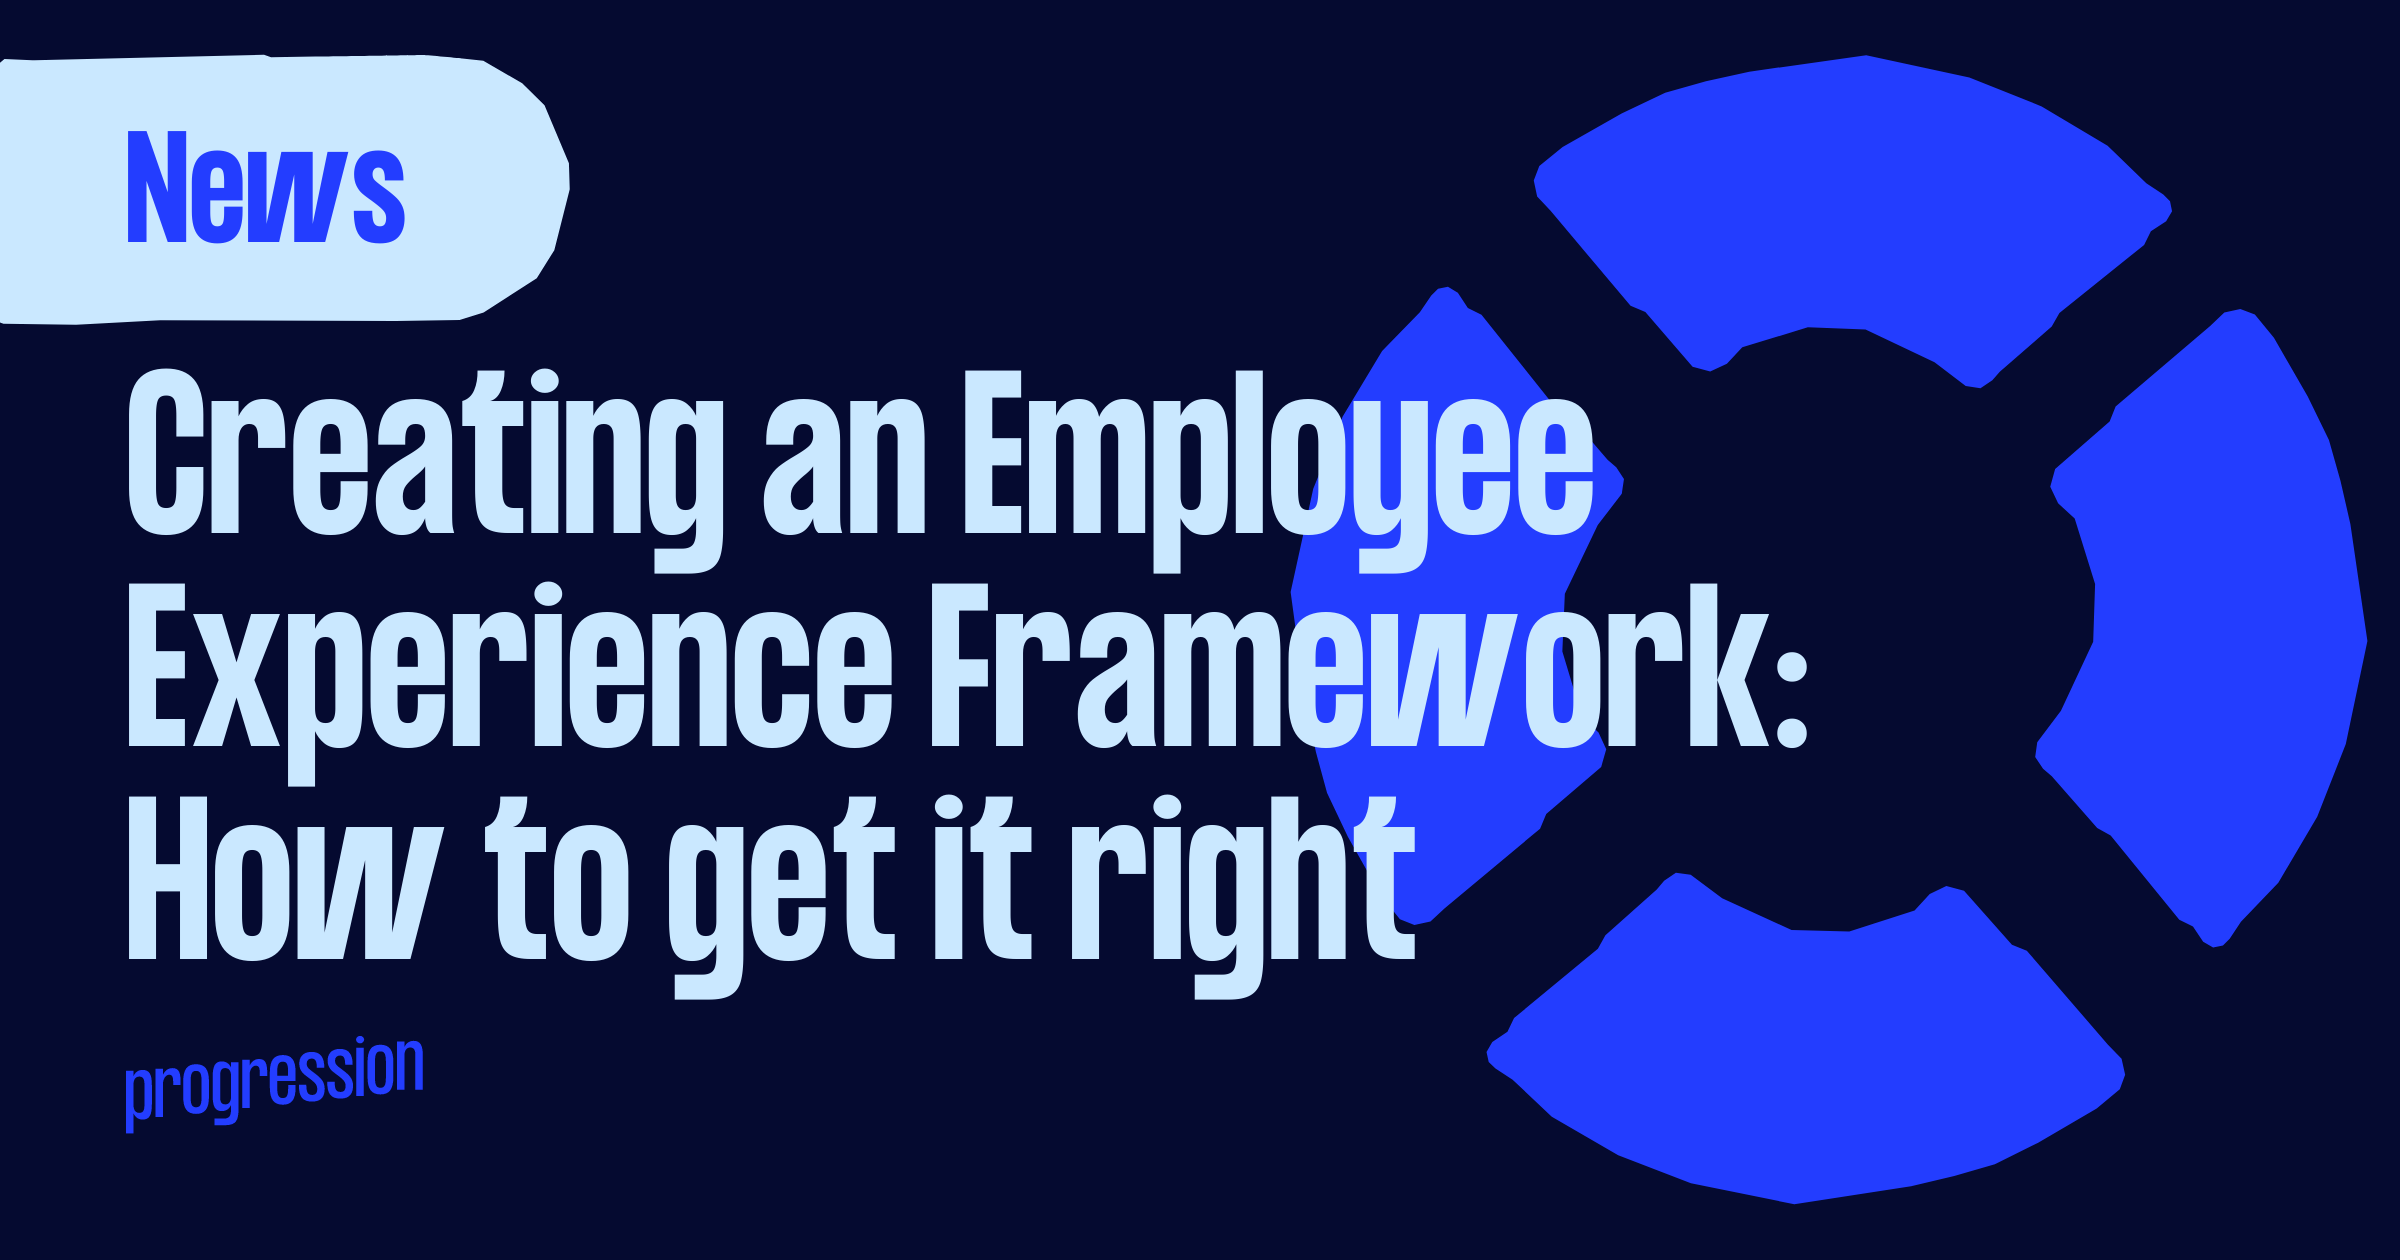 Creating an employee experience framework: how to get it right